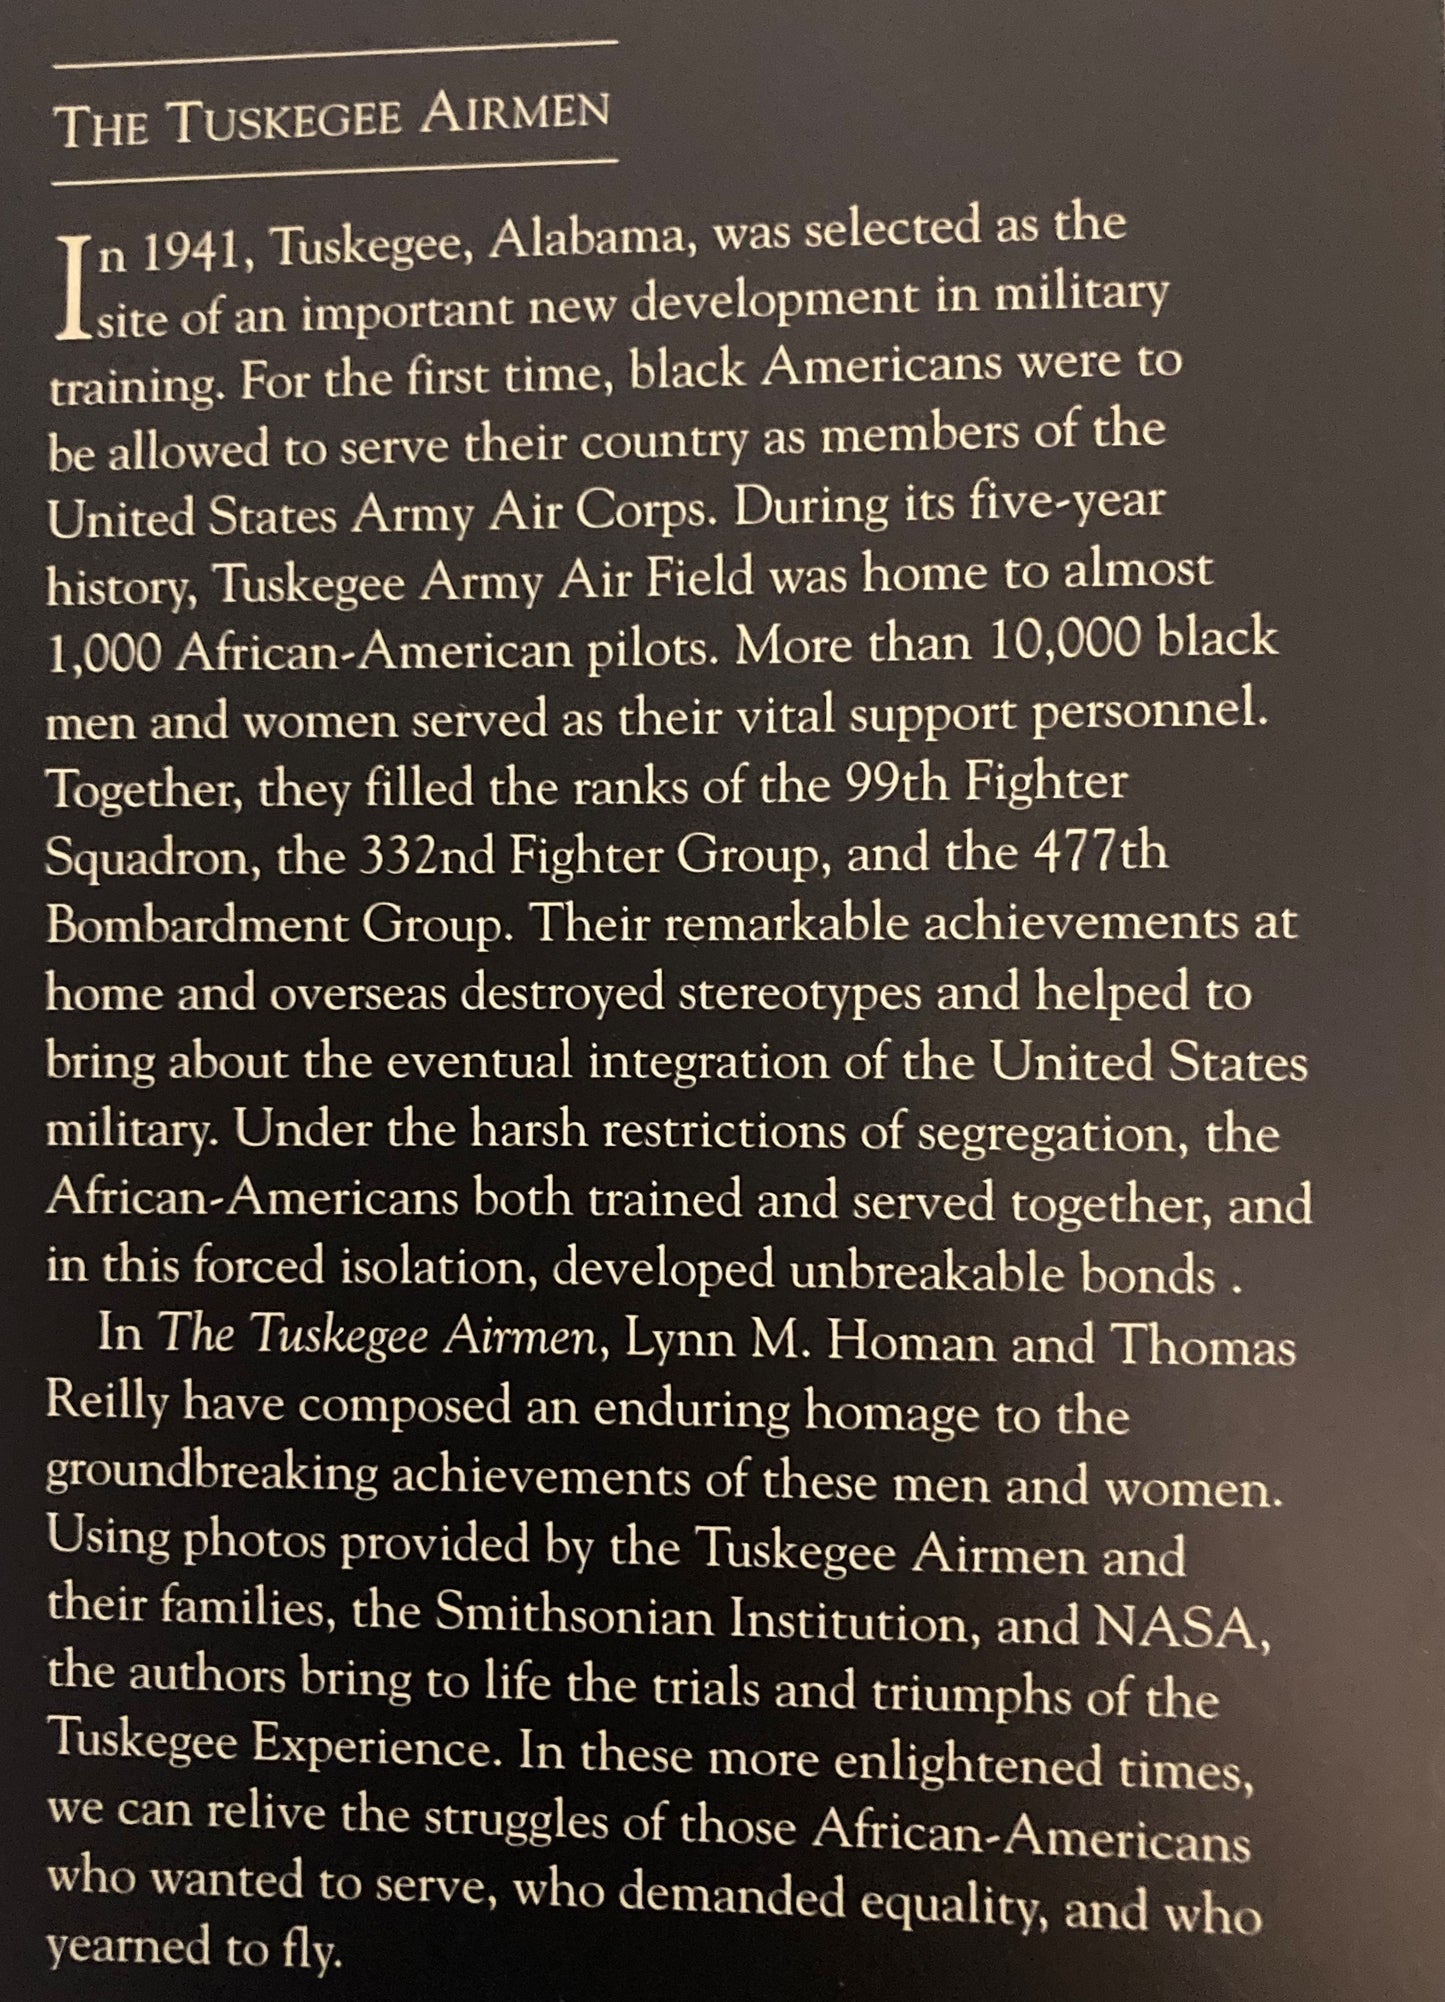 Images of America The Tuskegee Airmen (paperback)